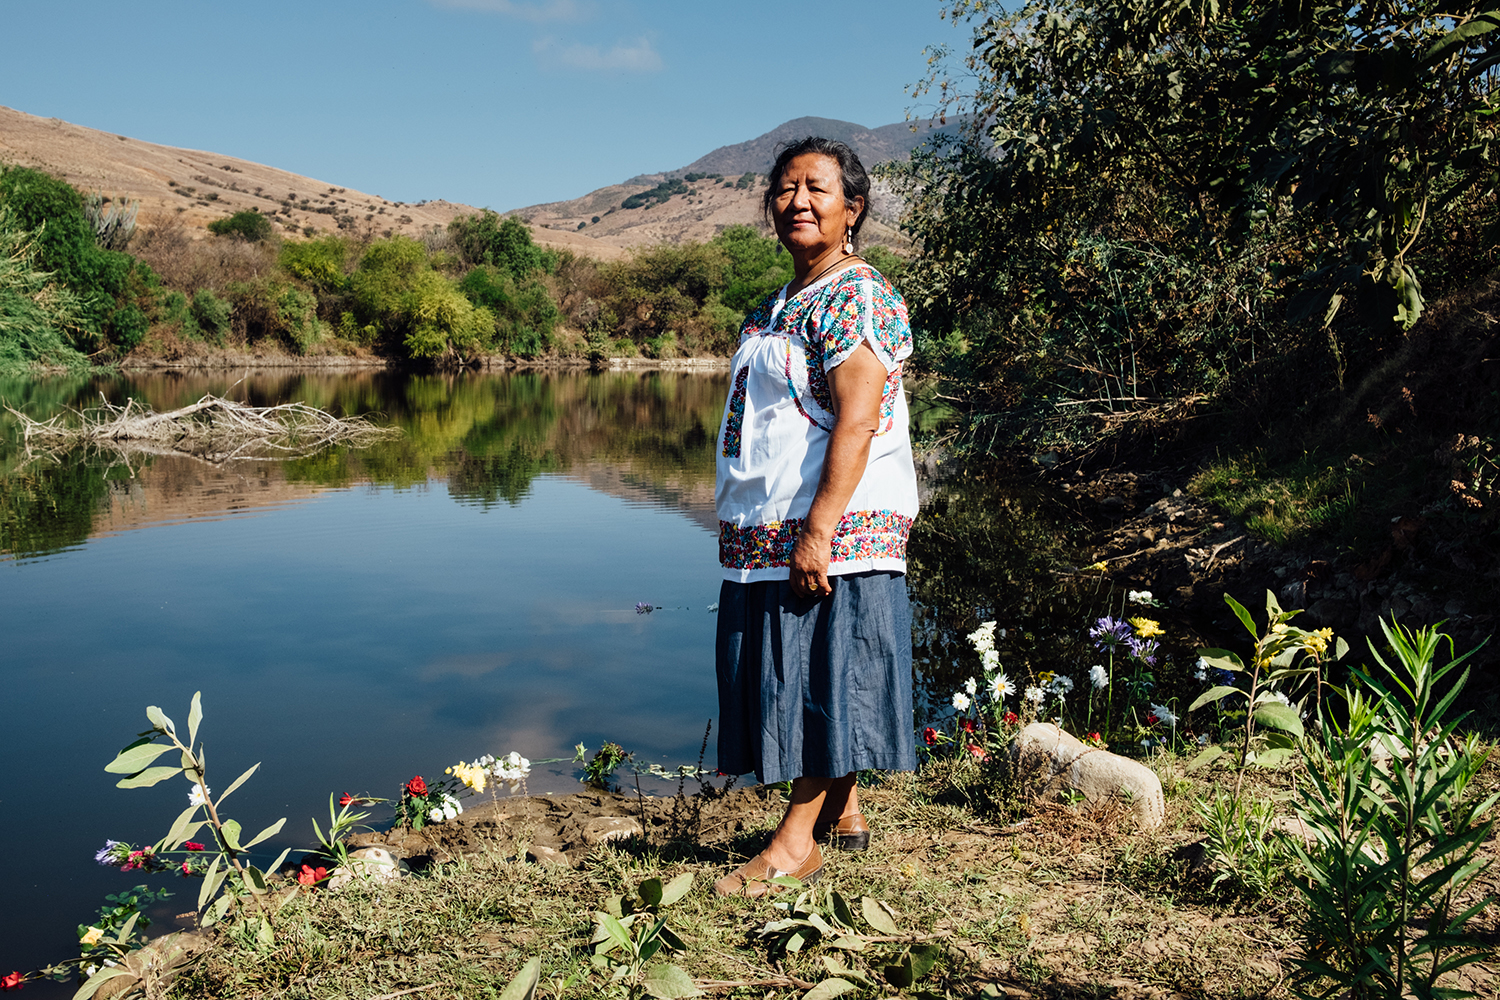 Carmen Santiago Alonso was a nun and indigenous rights activist in Oaxaca, Mexico. She headed the Flor y Canto Center for Indigenous Rights which she founded in 1995 to fight for local water and land rights. Photo by Noel Rojo